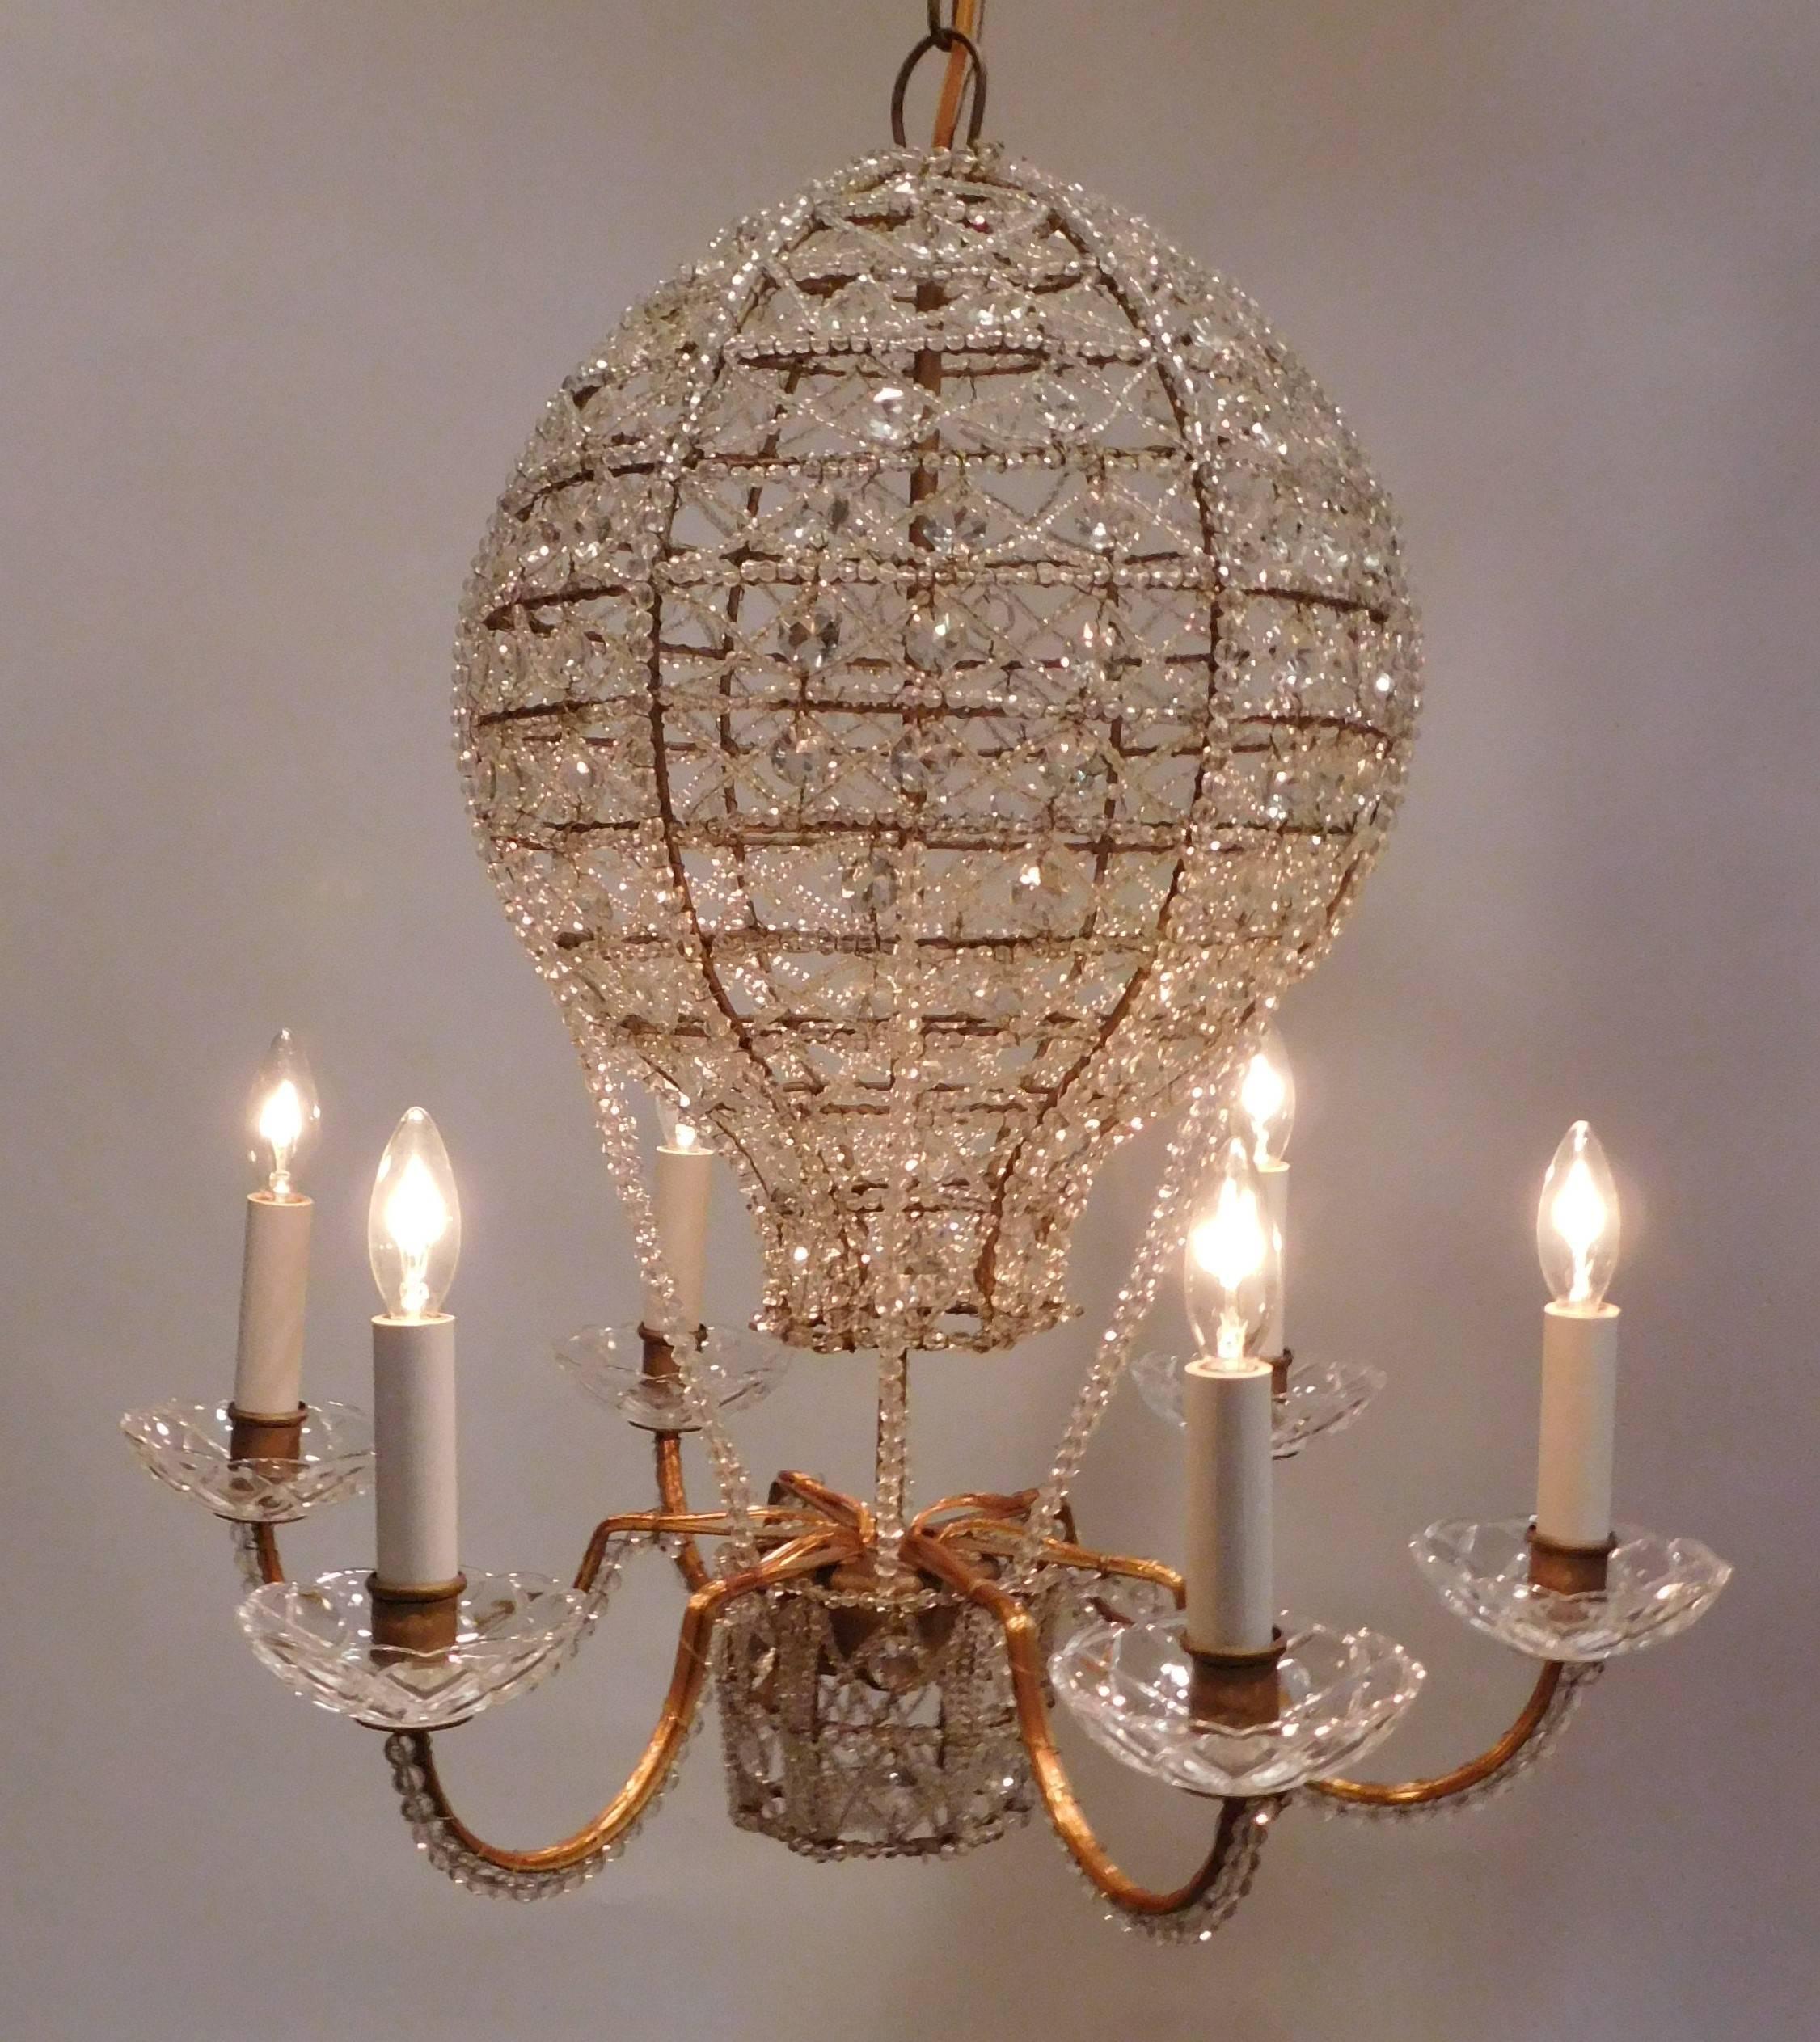 Six lights with hand-cut and hand-beaded crystals over gilt metal frame includes chain, hanging hardware and ceiling cap.